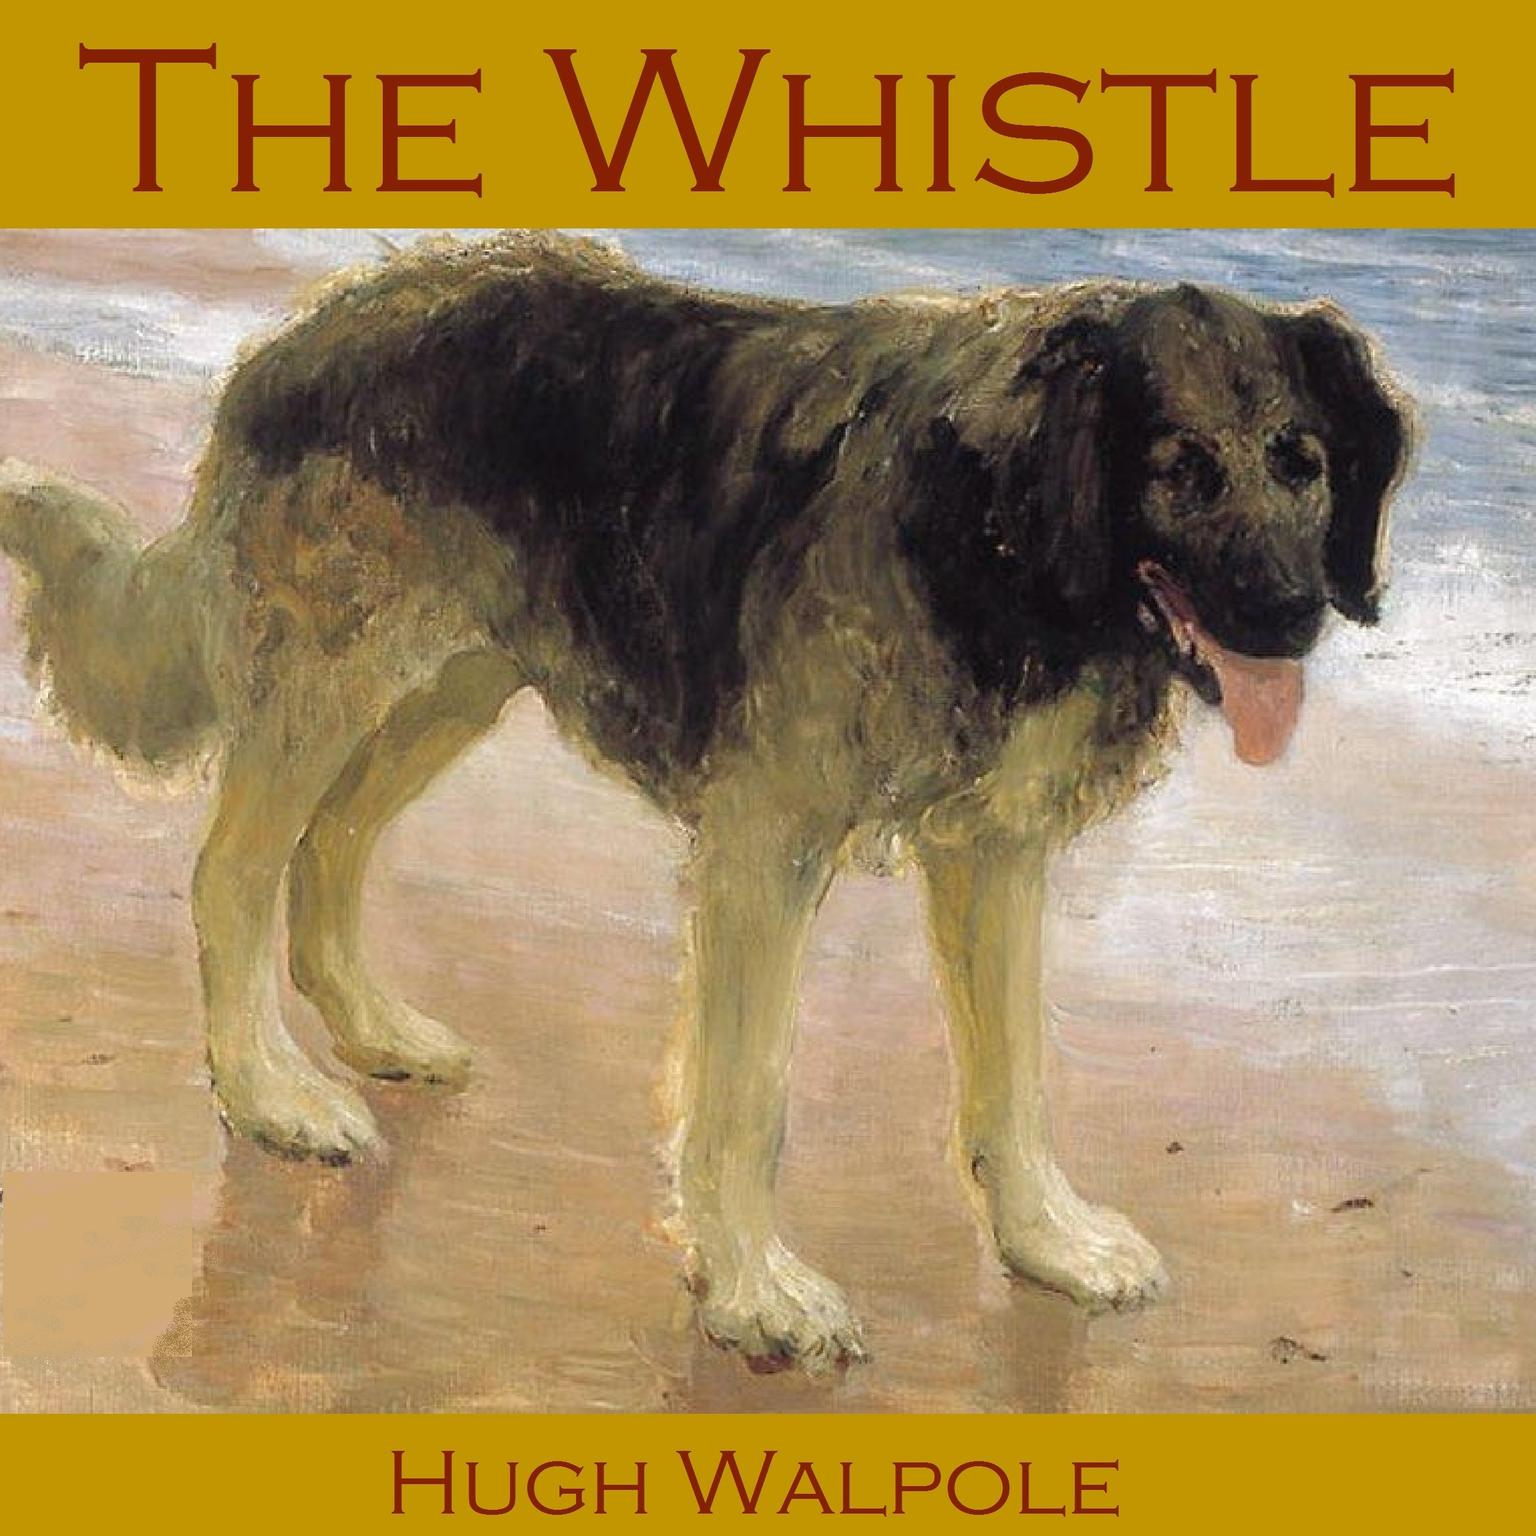 The Whistle Audiobook, by Hugh Walpole